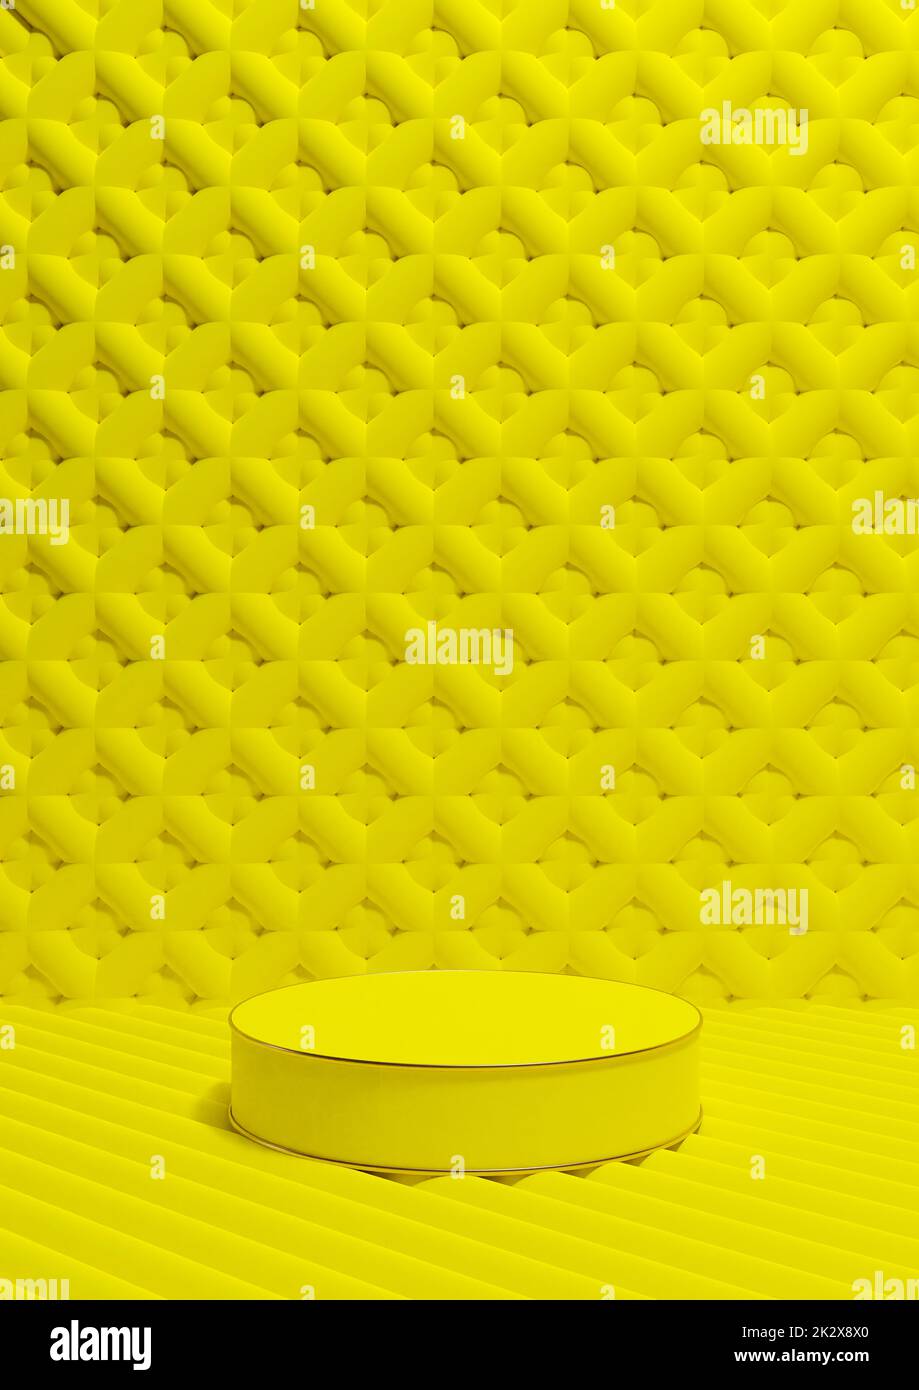 Bright, neon yellow 3D rendering luxury product display vertical product photography one cylinder podium stand golden line and ornament wallpaper or background simple, minimal composition Stock Photo